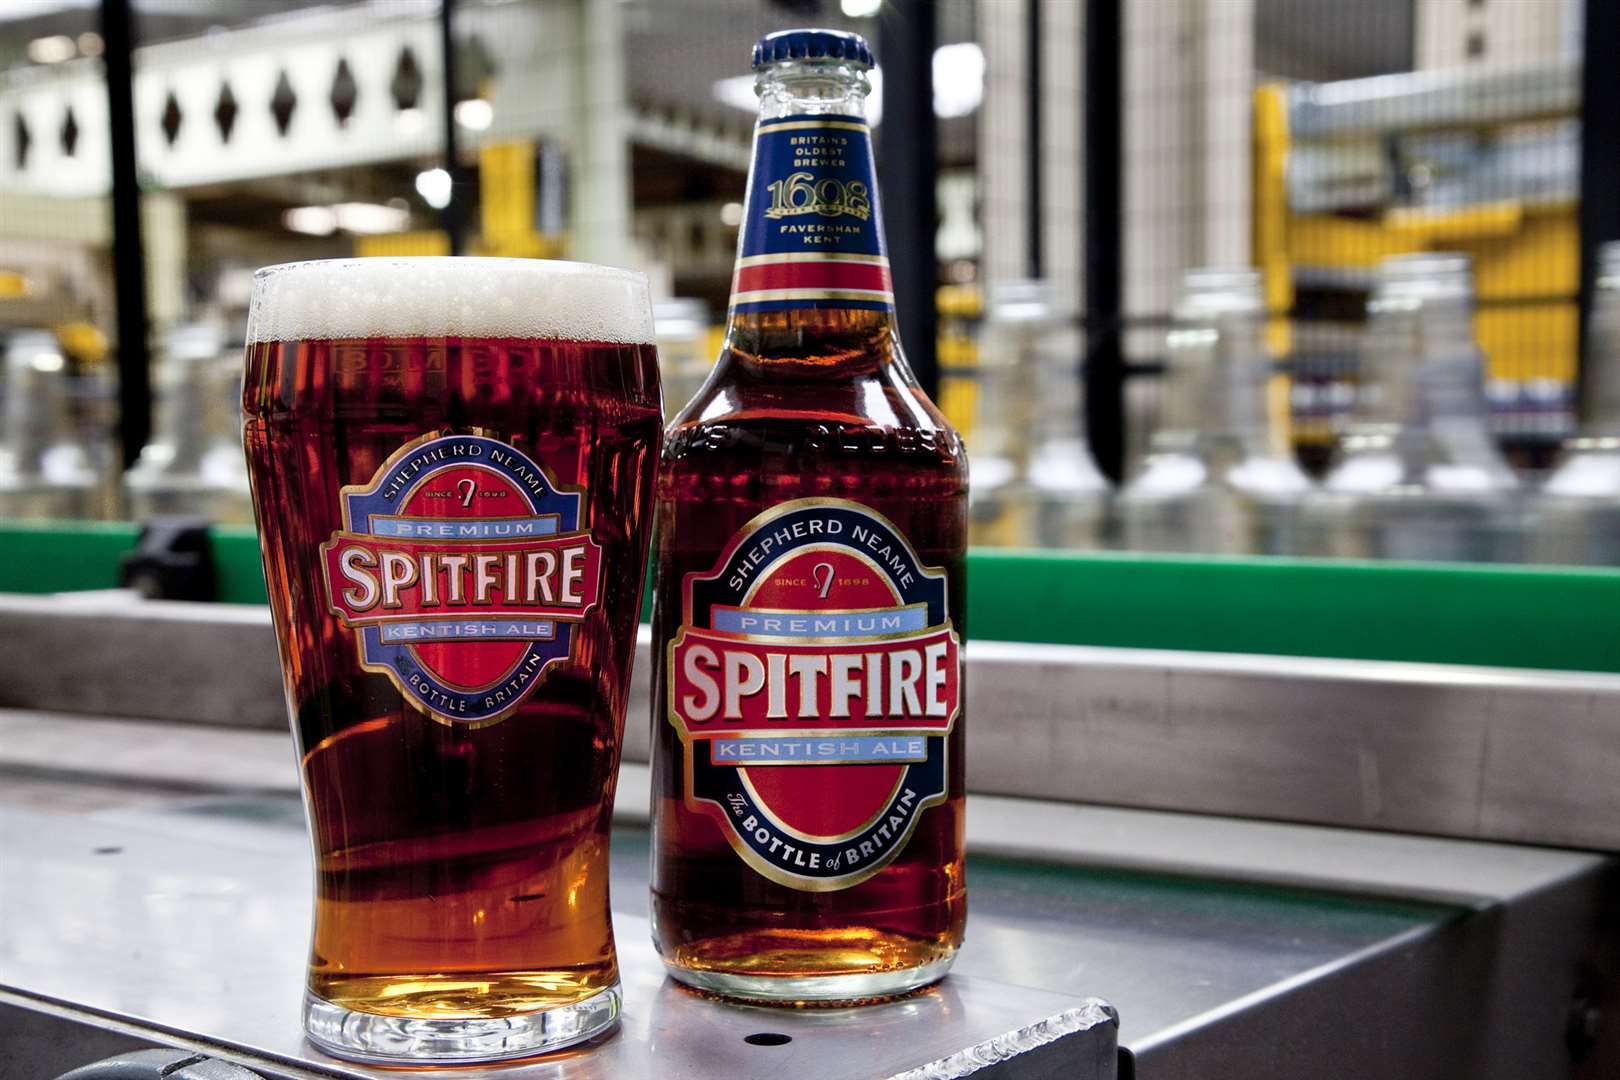 The town is home to Shepherd Neame